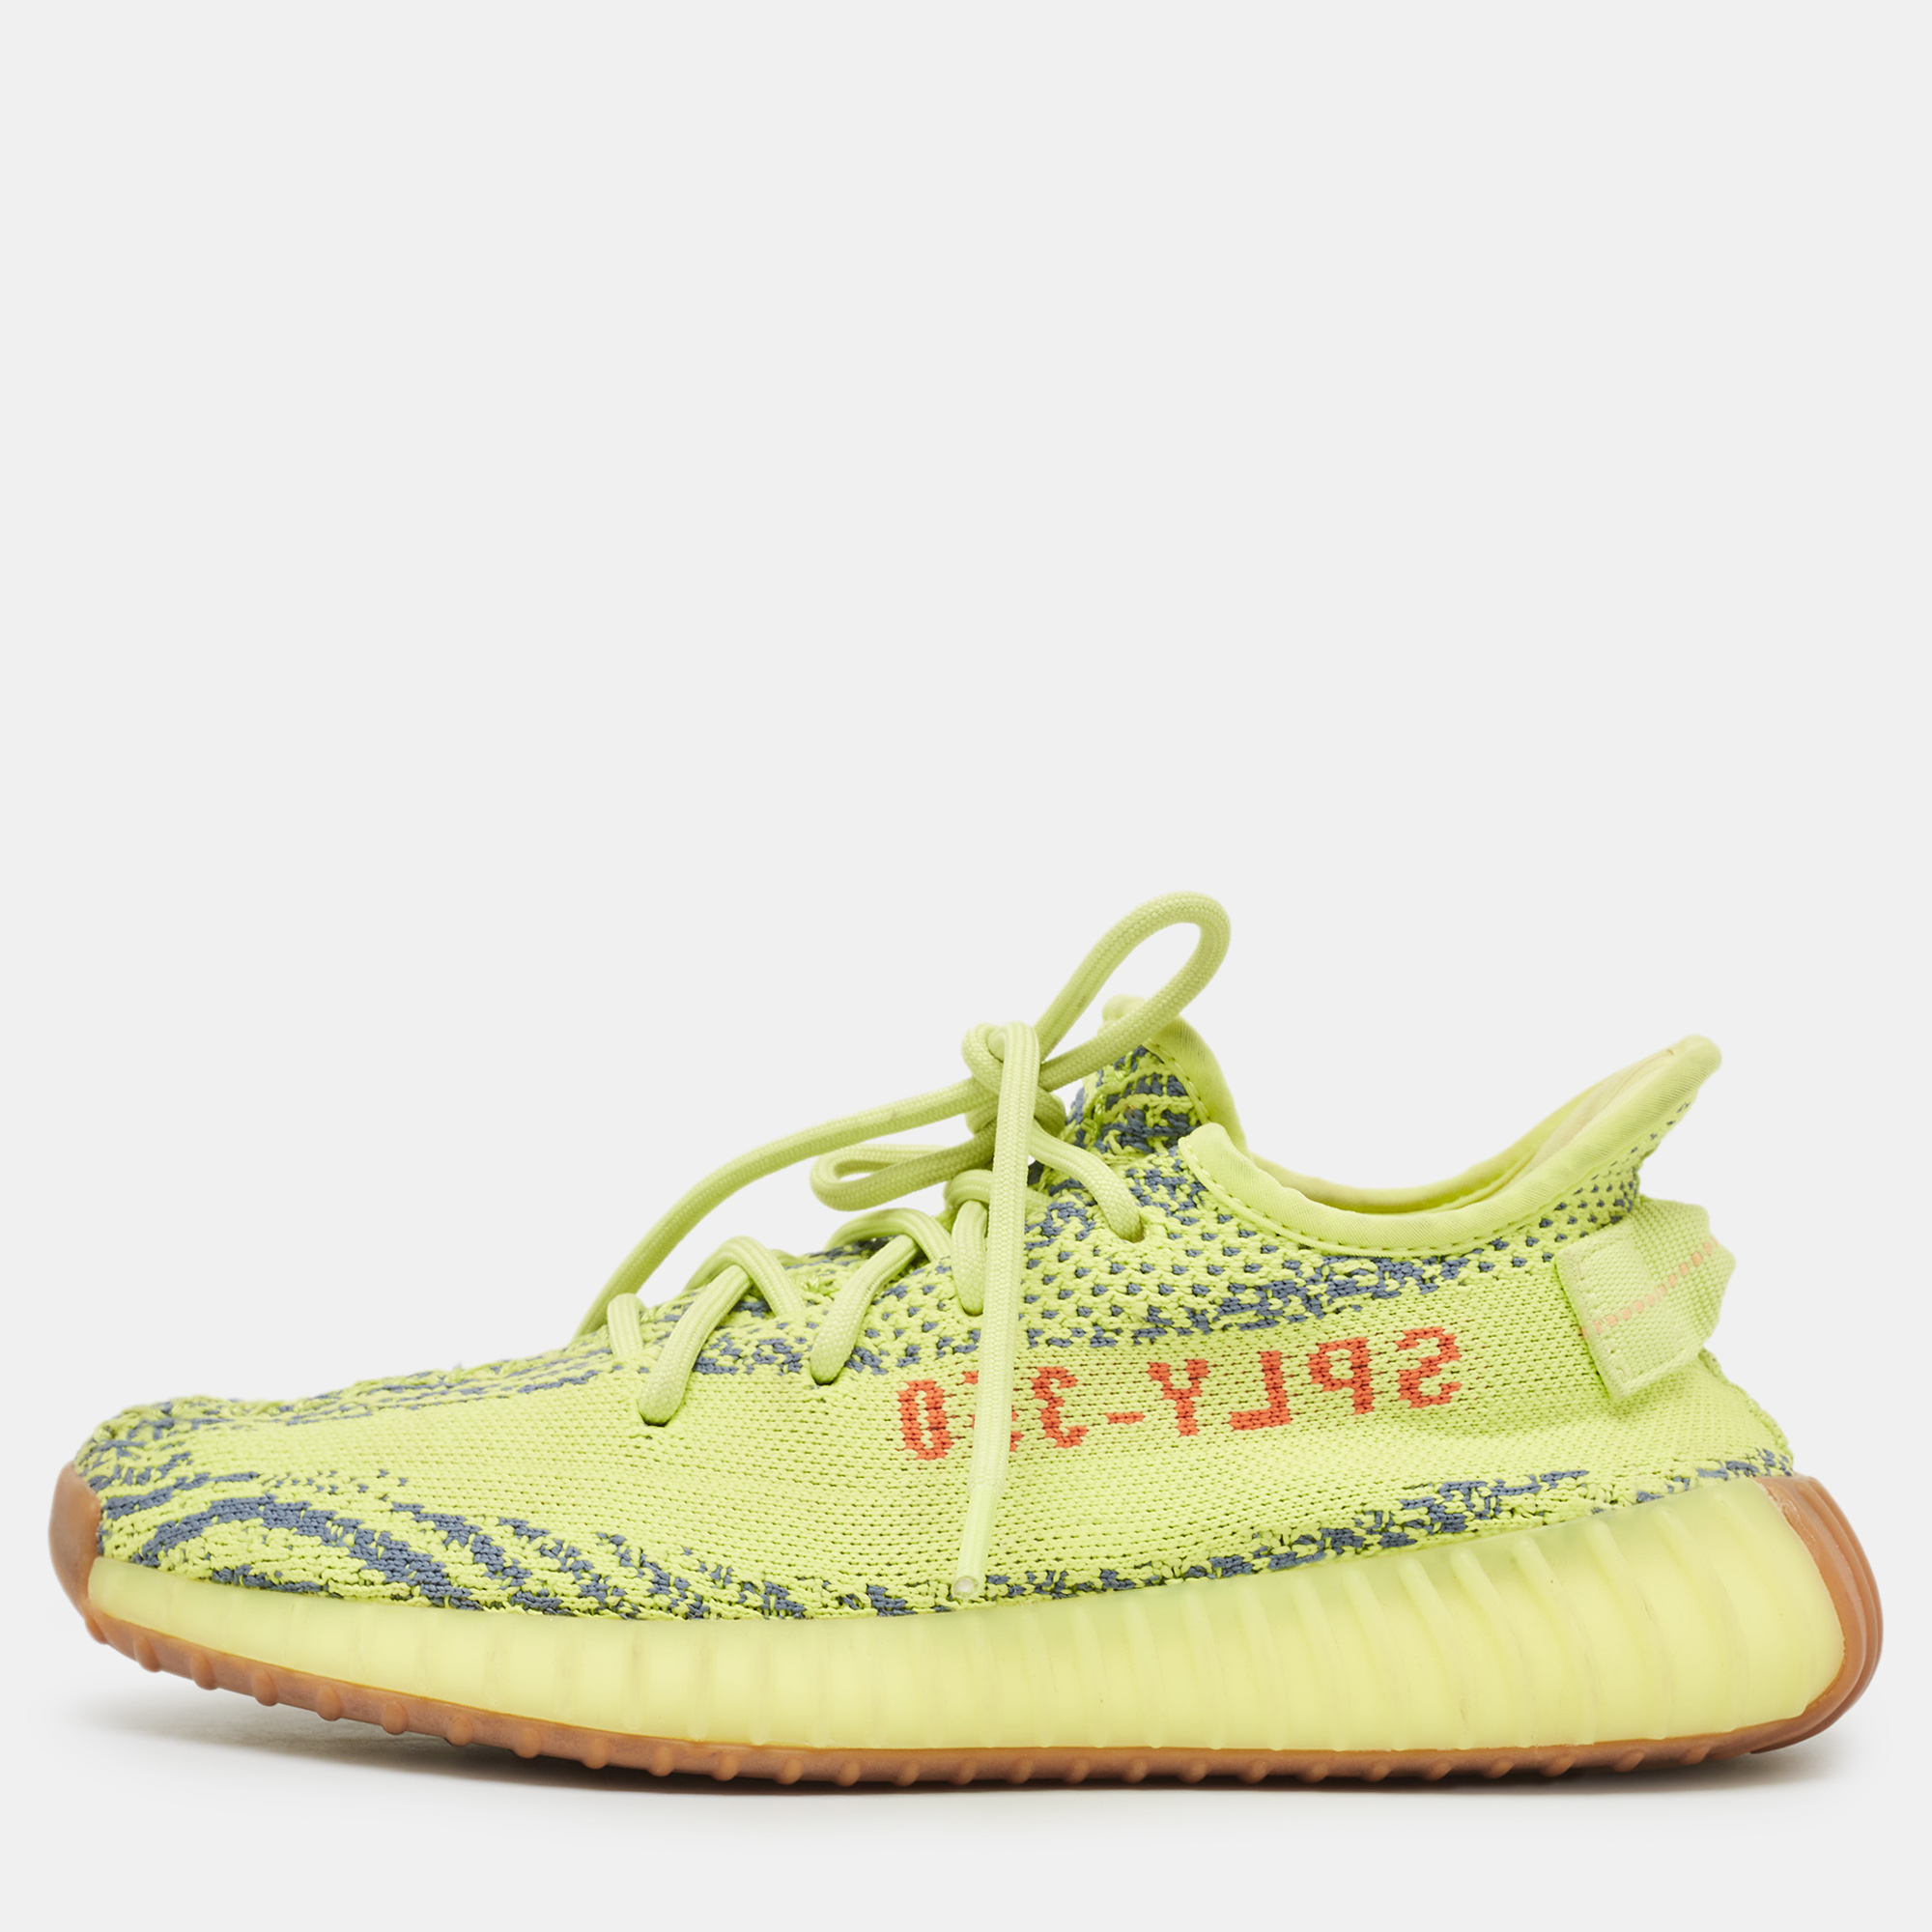 

Yeezy x Adidas Neon Yellow/Blue Knit Fabric Boost 350 V2 Semi Frozen Yellow Sneakers Size 39 1/3